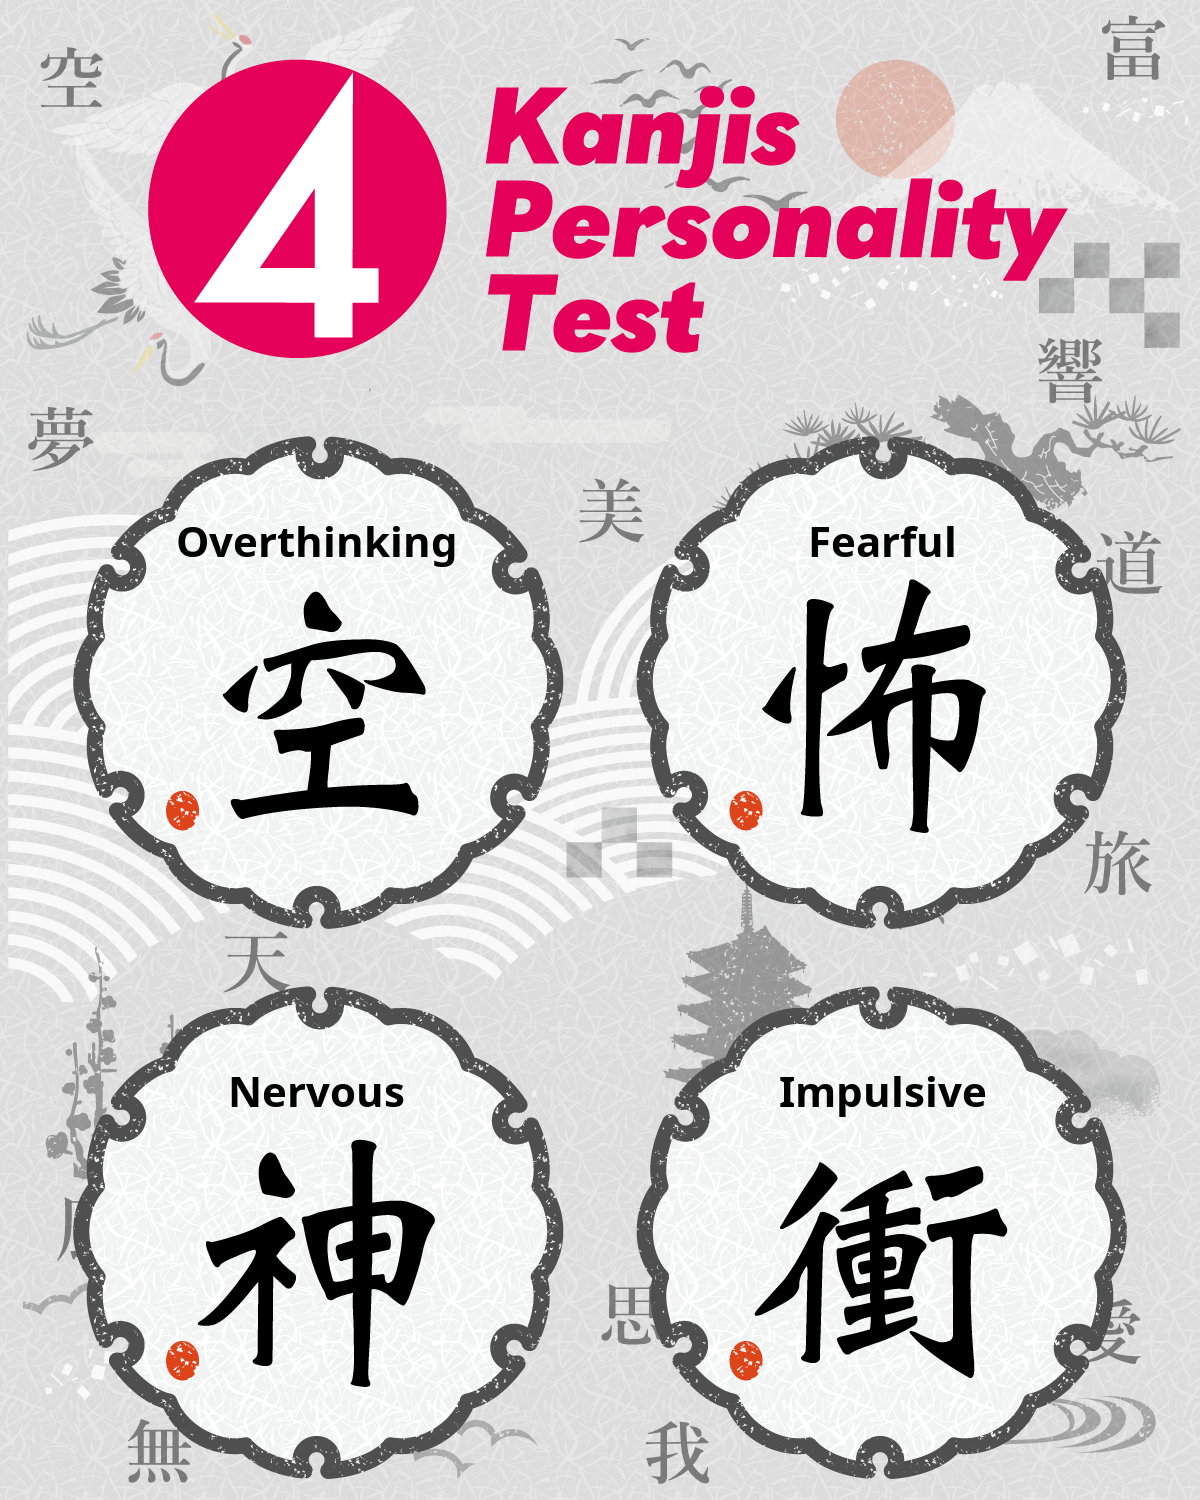 4 Kanjis Personality Test | What four Kanji characters describe your personality?